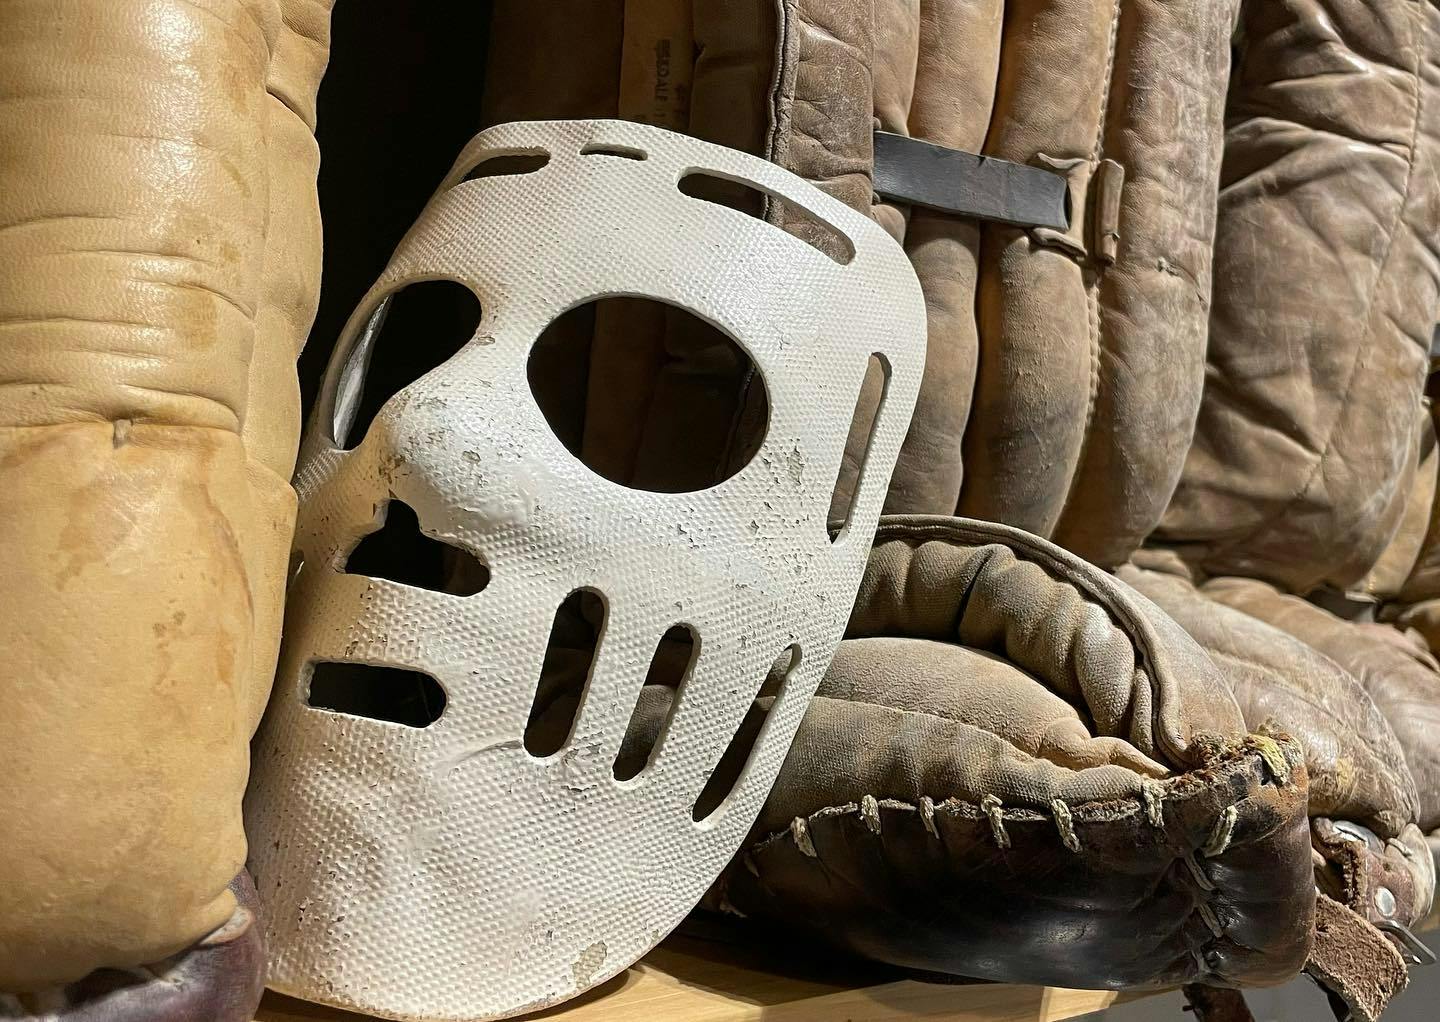 Old mask and goalie pads